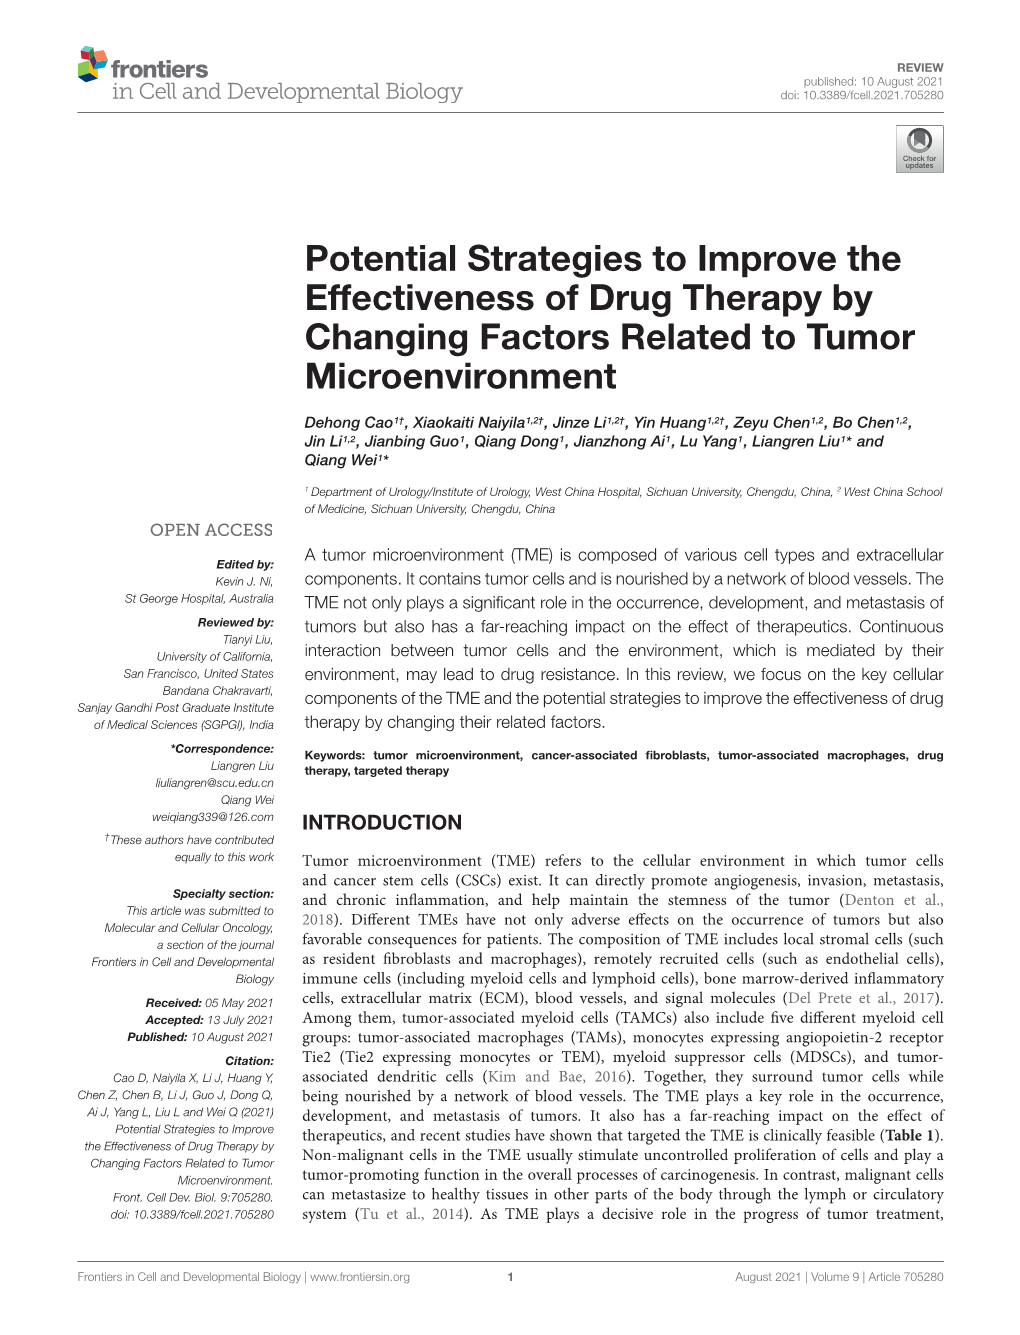 Potential Strategies to Improve the Effectiveness of Drug Therapy by Changing Factors Related to Tumor Microenvironment